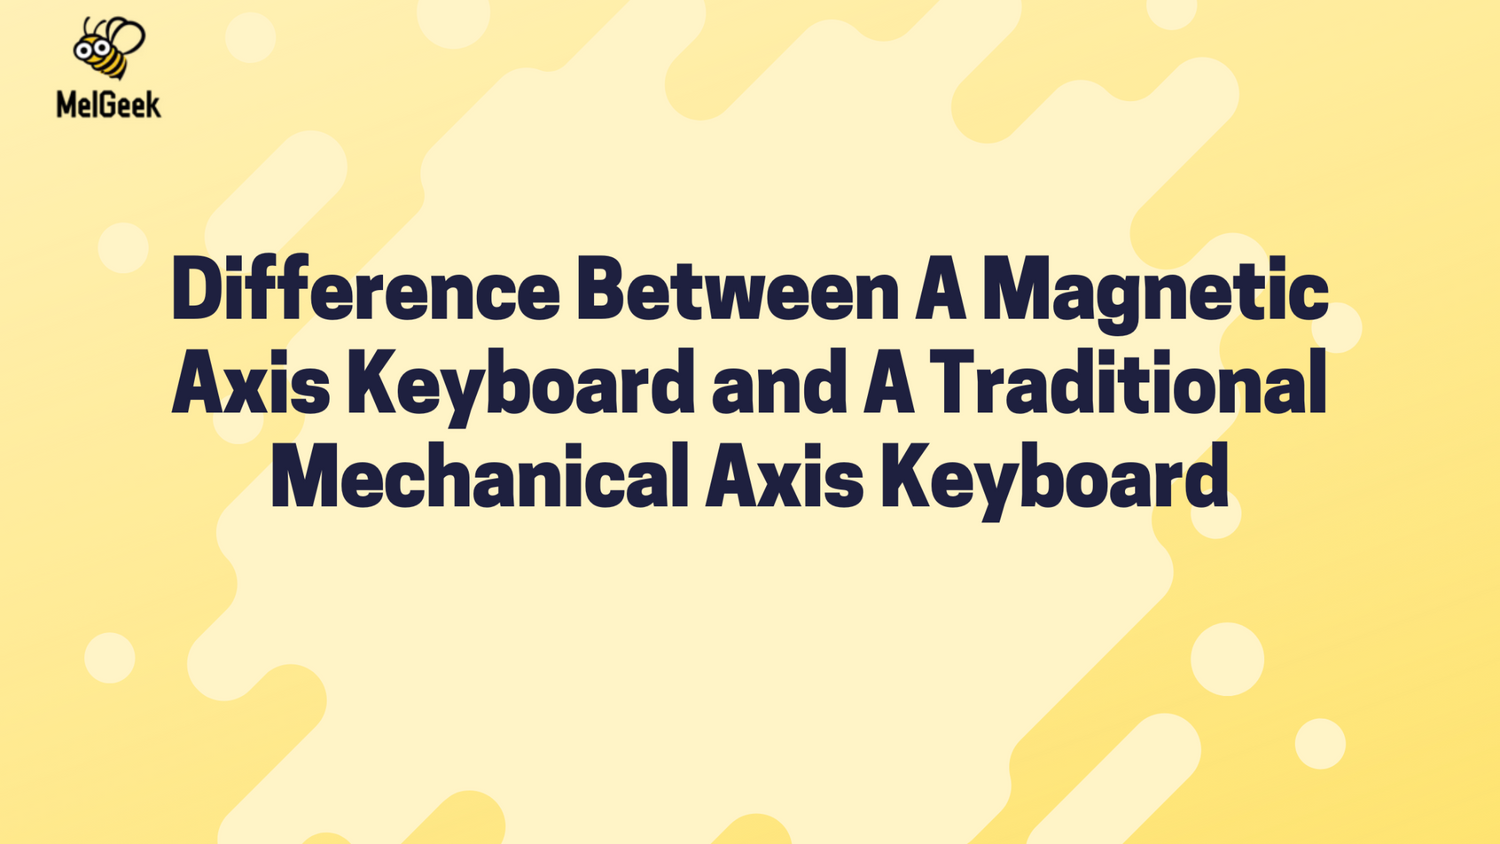 Difference Between Magnetic Axis Keyboard and Traditional Mechanical Axis Keyboard